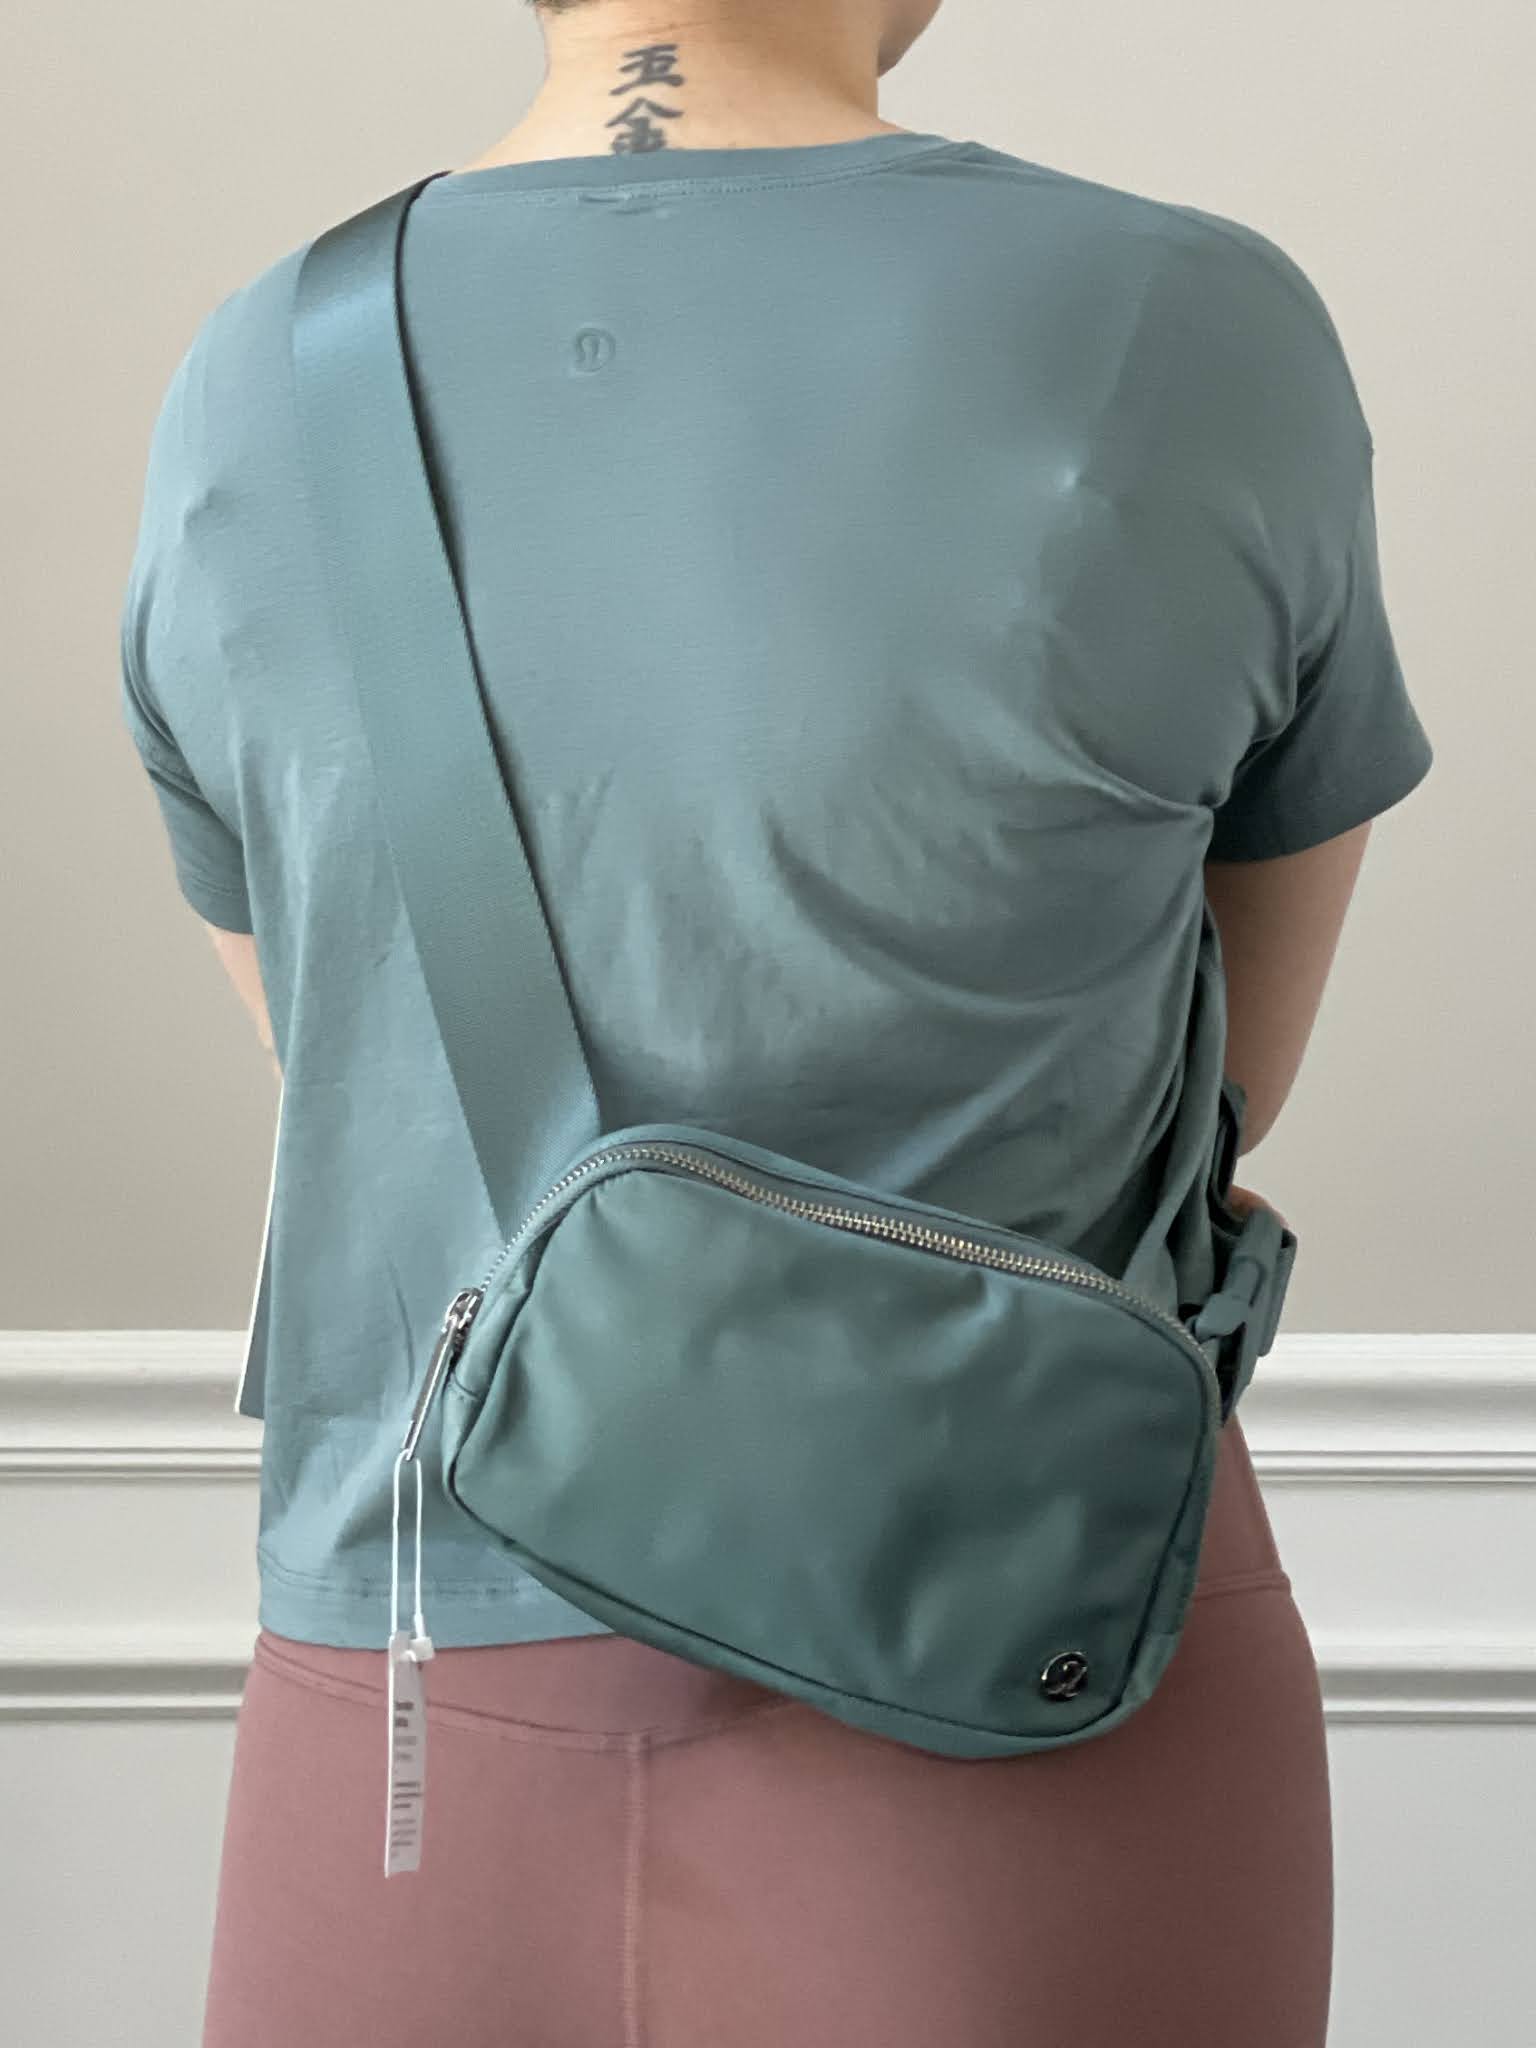 Fit Review Friday! Cates Tee and Everywhere Belt Bag in Tidewater Teal